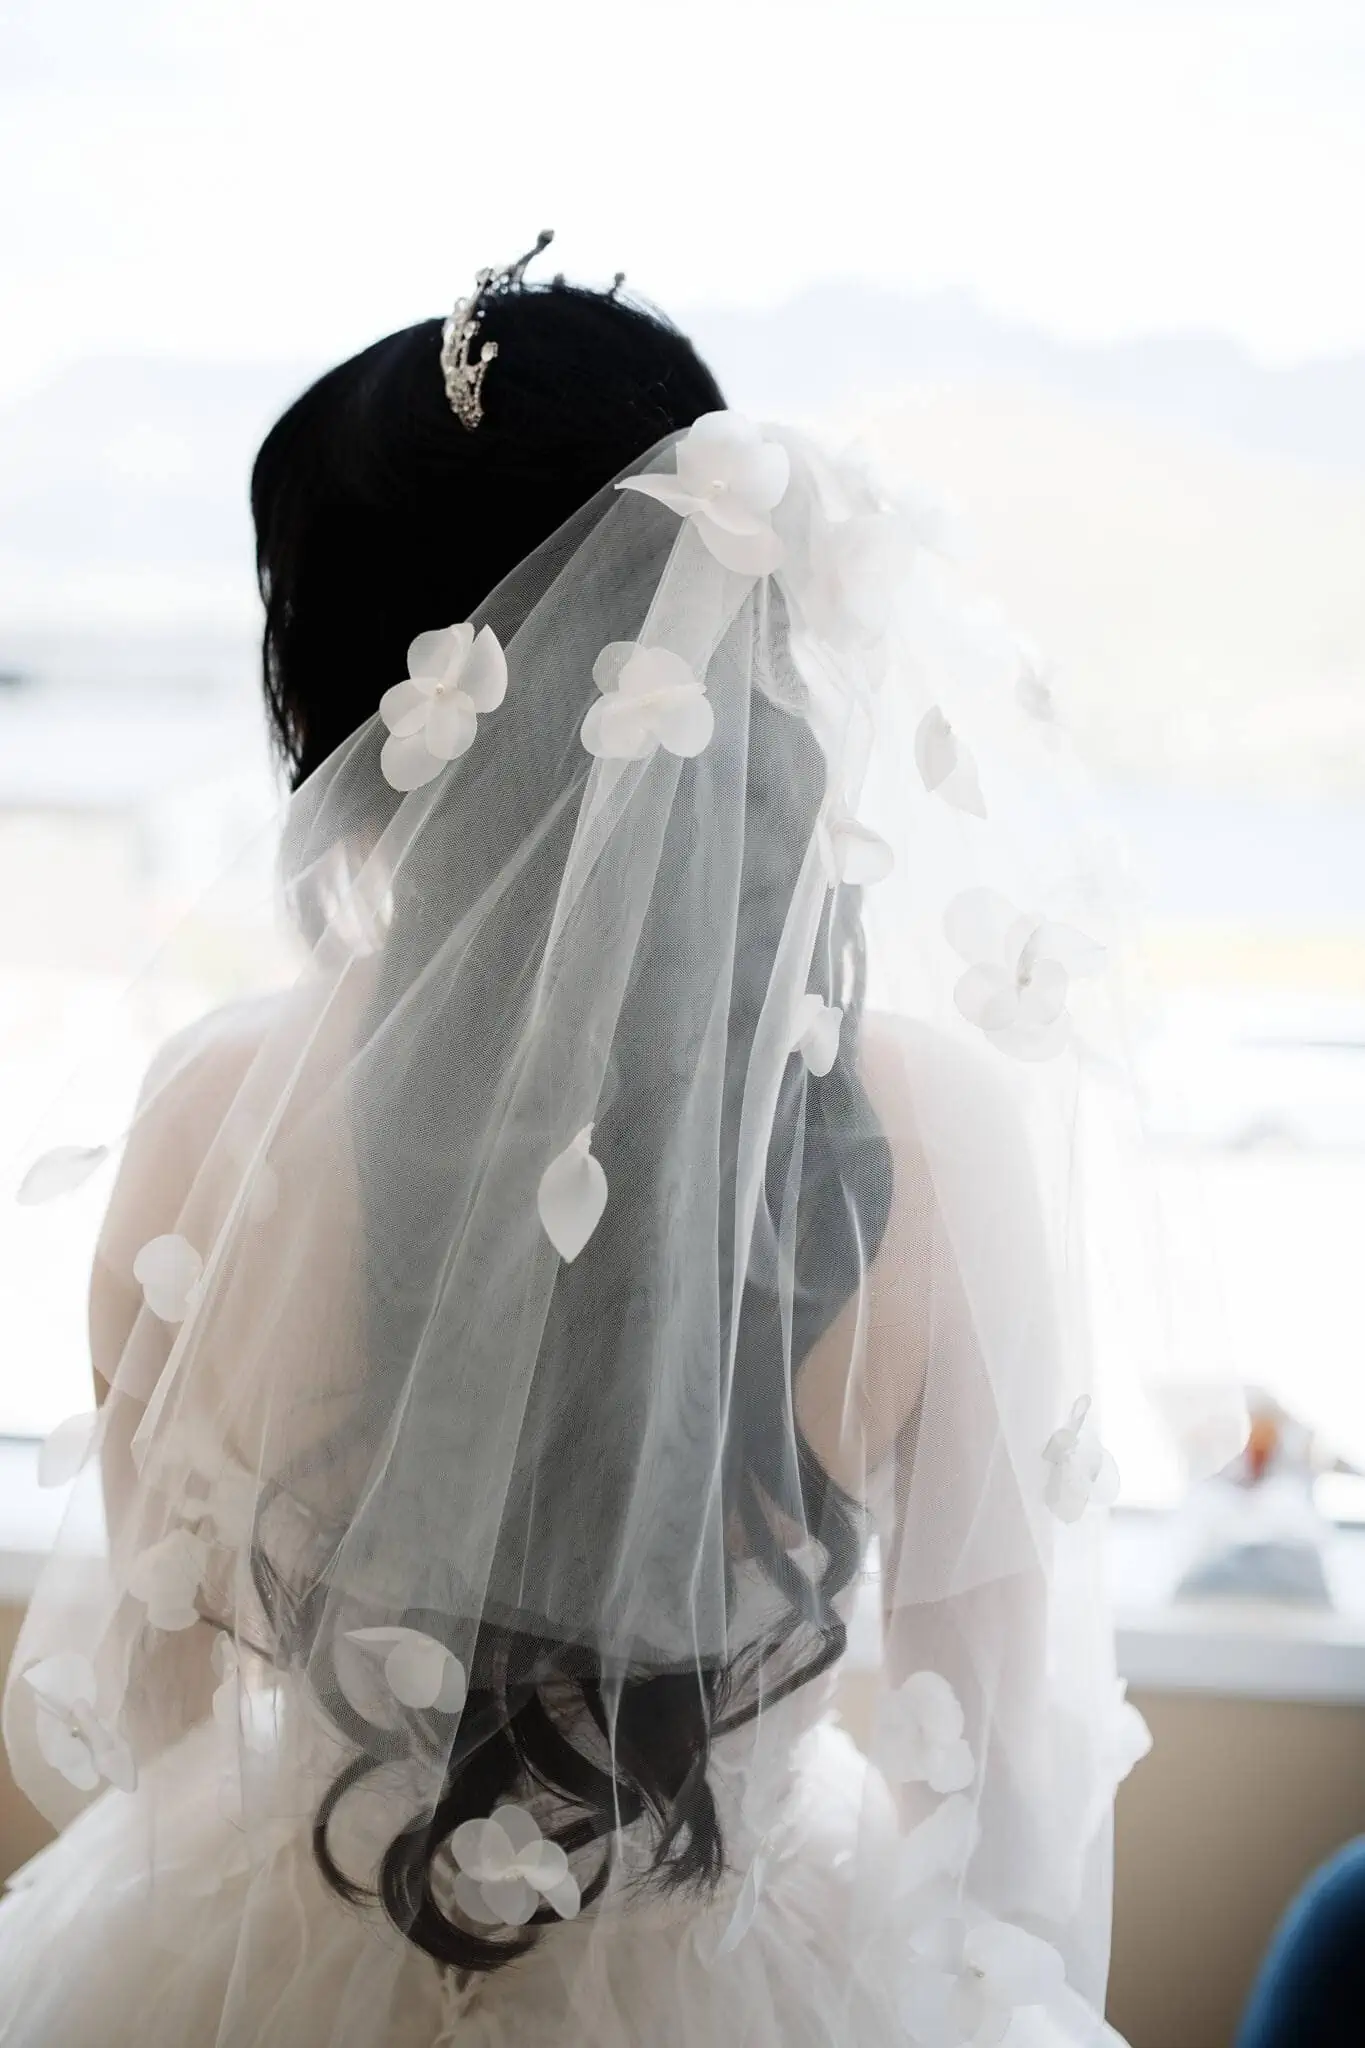 Intimate bride with veil in front of window during Carlos and Wanzhu's Cecil Peak Heli Elopement Wedding.